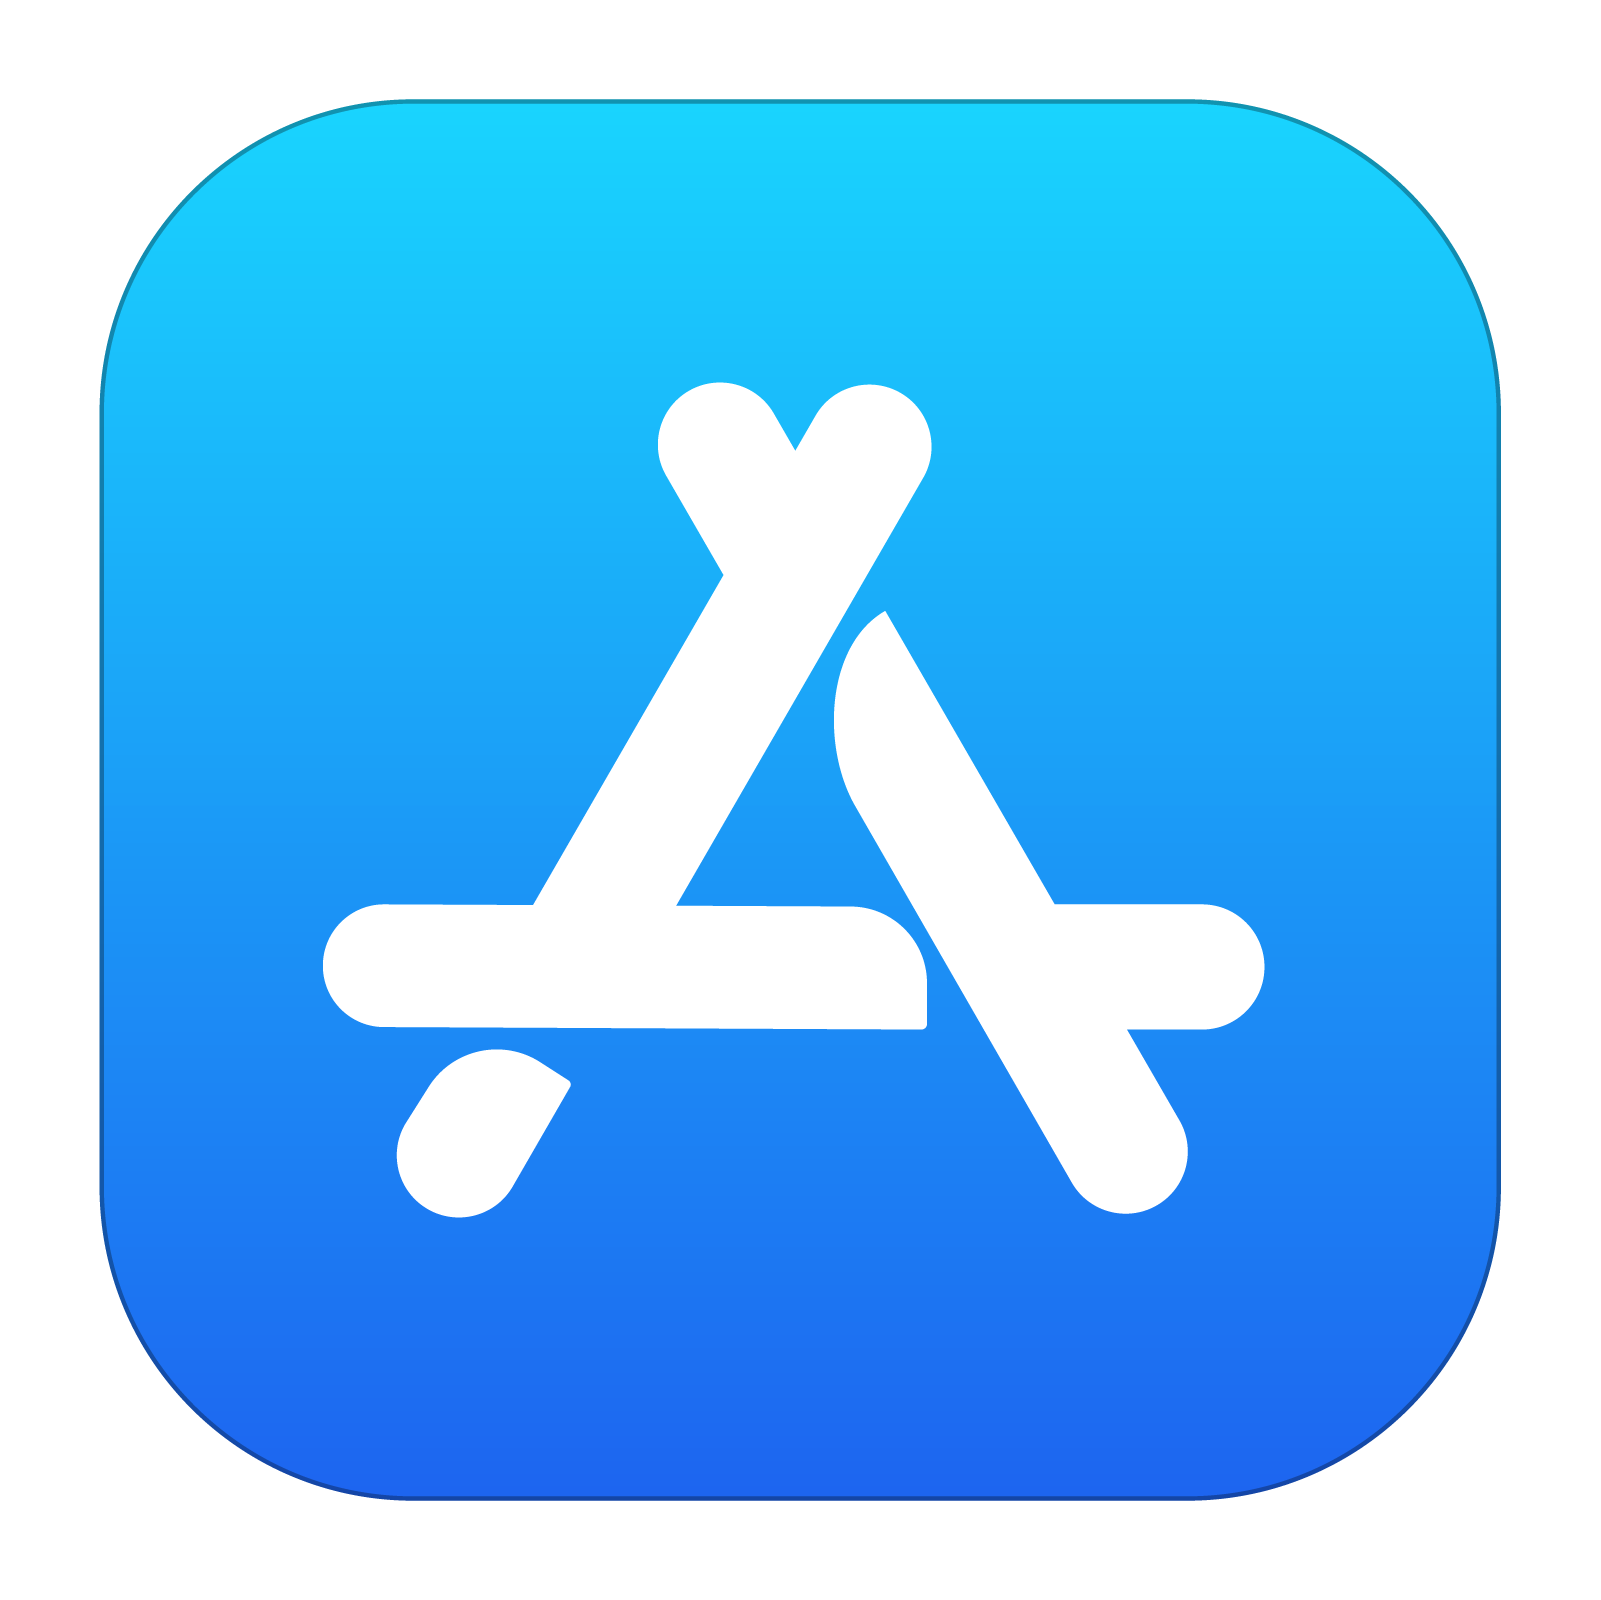 Blue Apple Text App Iphone Store PNG Image